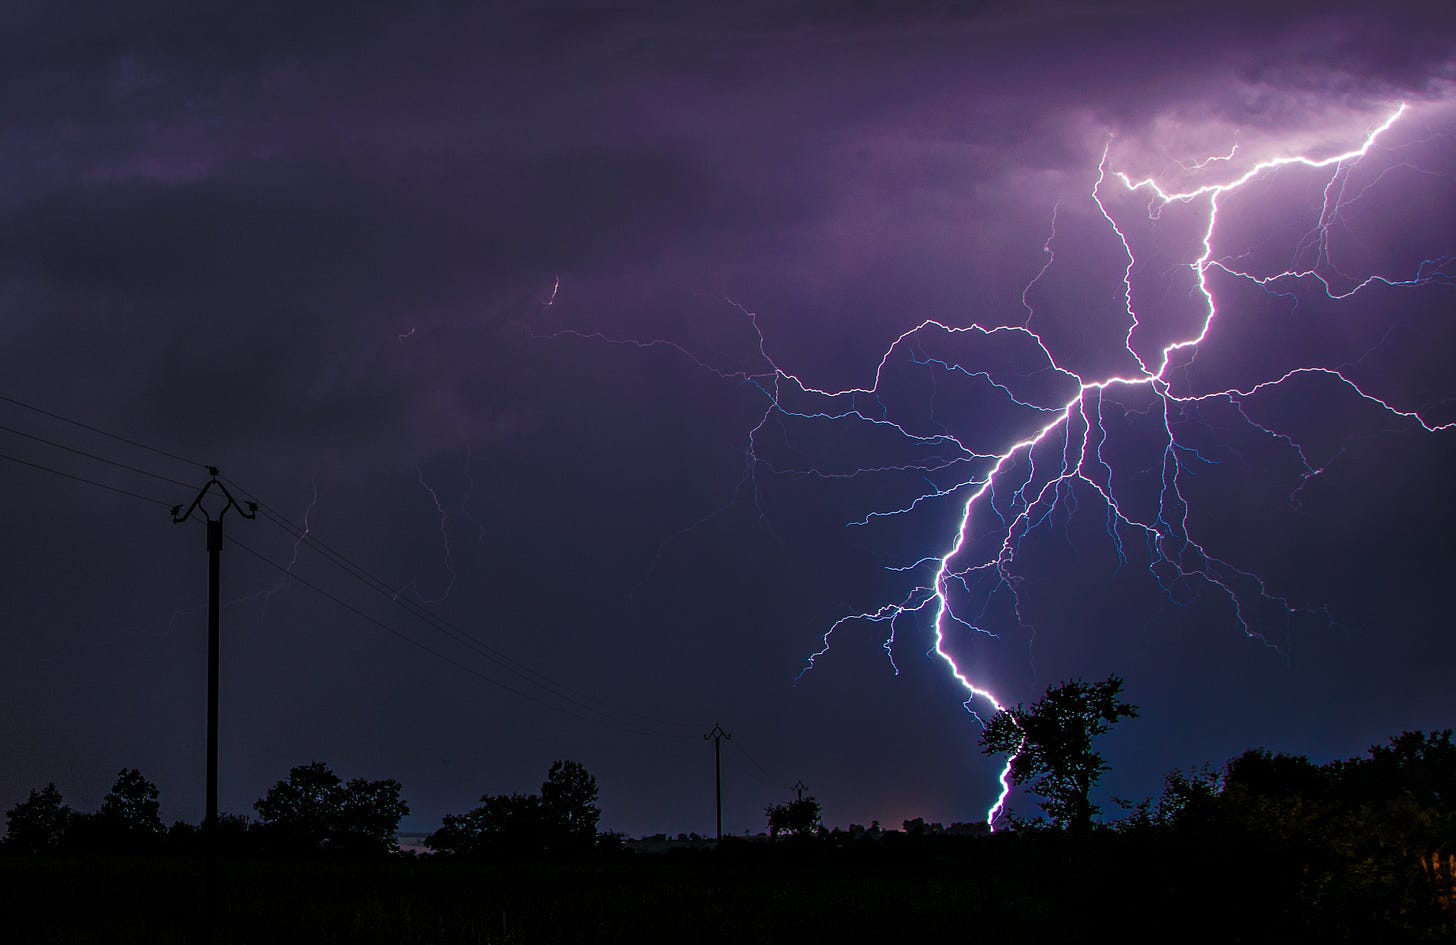 A purple bolt of lightning strikes the ground against a night sky.